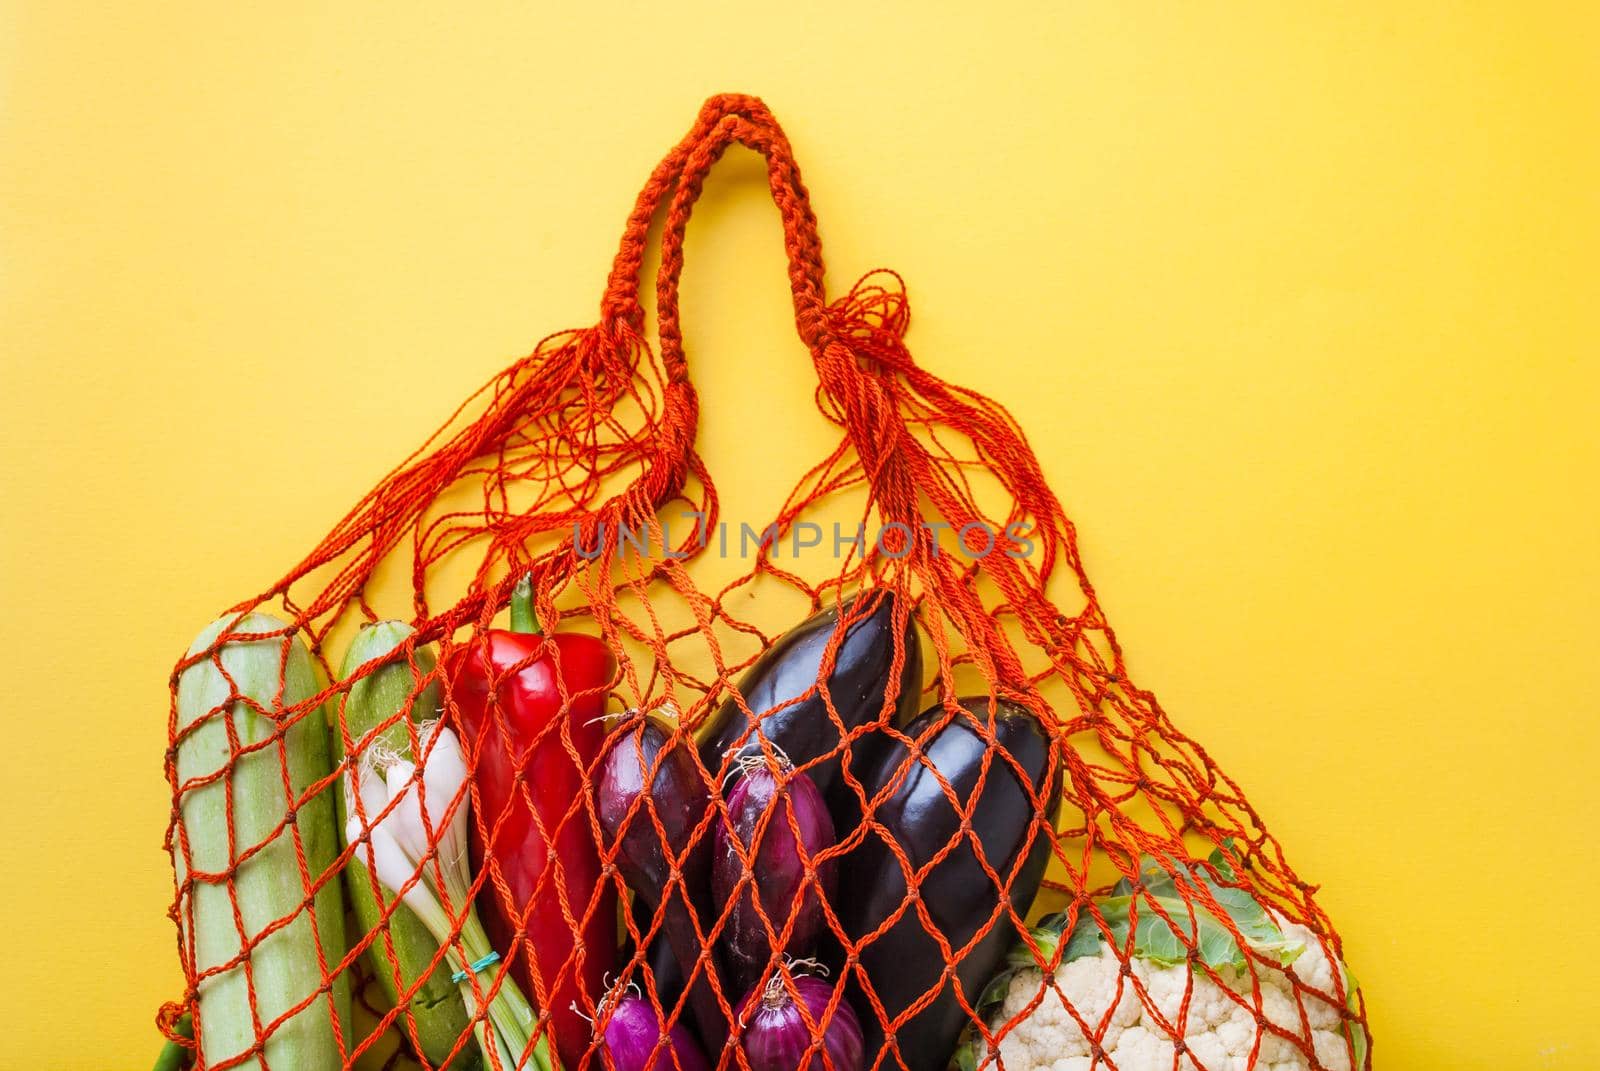 zero waste shopping concept. vegetables in mesh bag without plastic by maramorosz